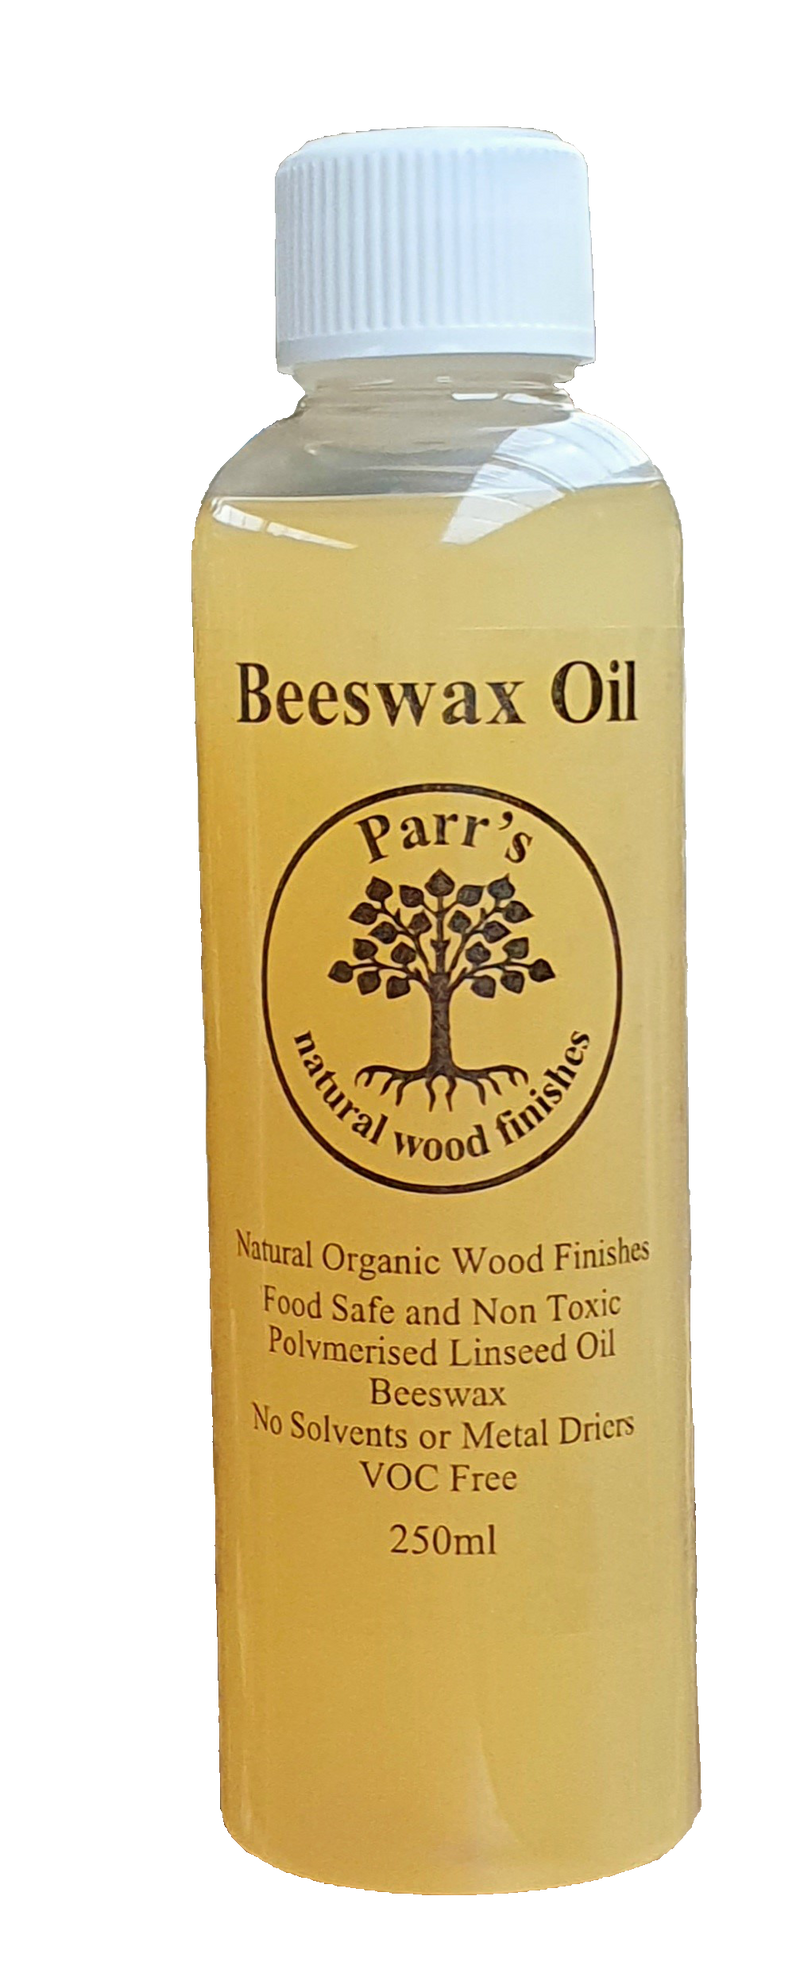 Beeswax Oil